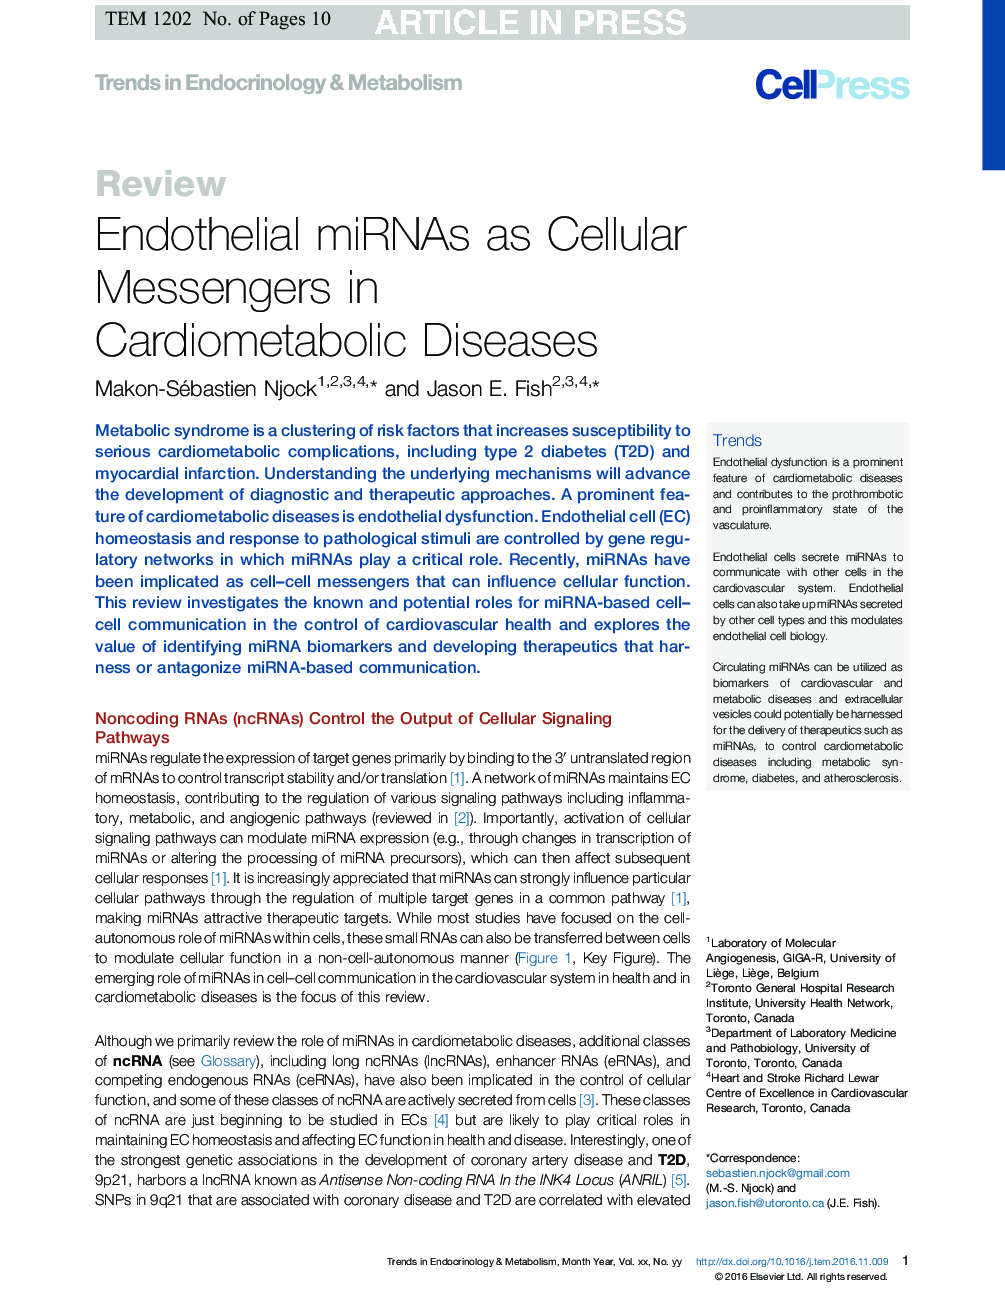 Endothelial miRNAs as Cellular Messengers in Cardiometabolic Diseases